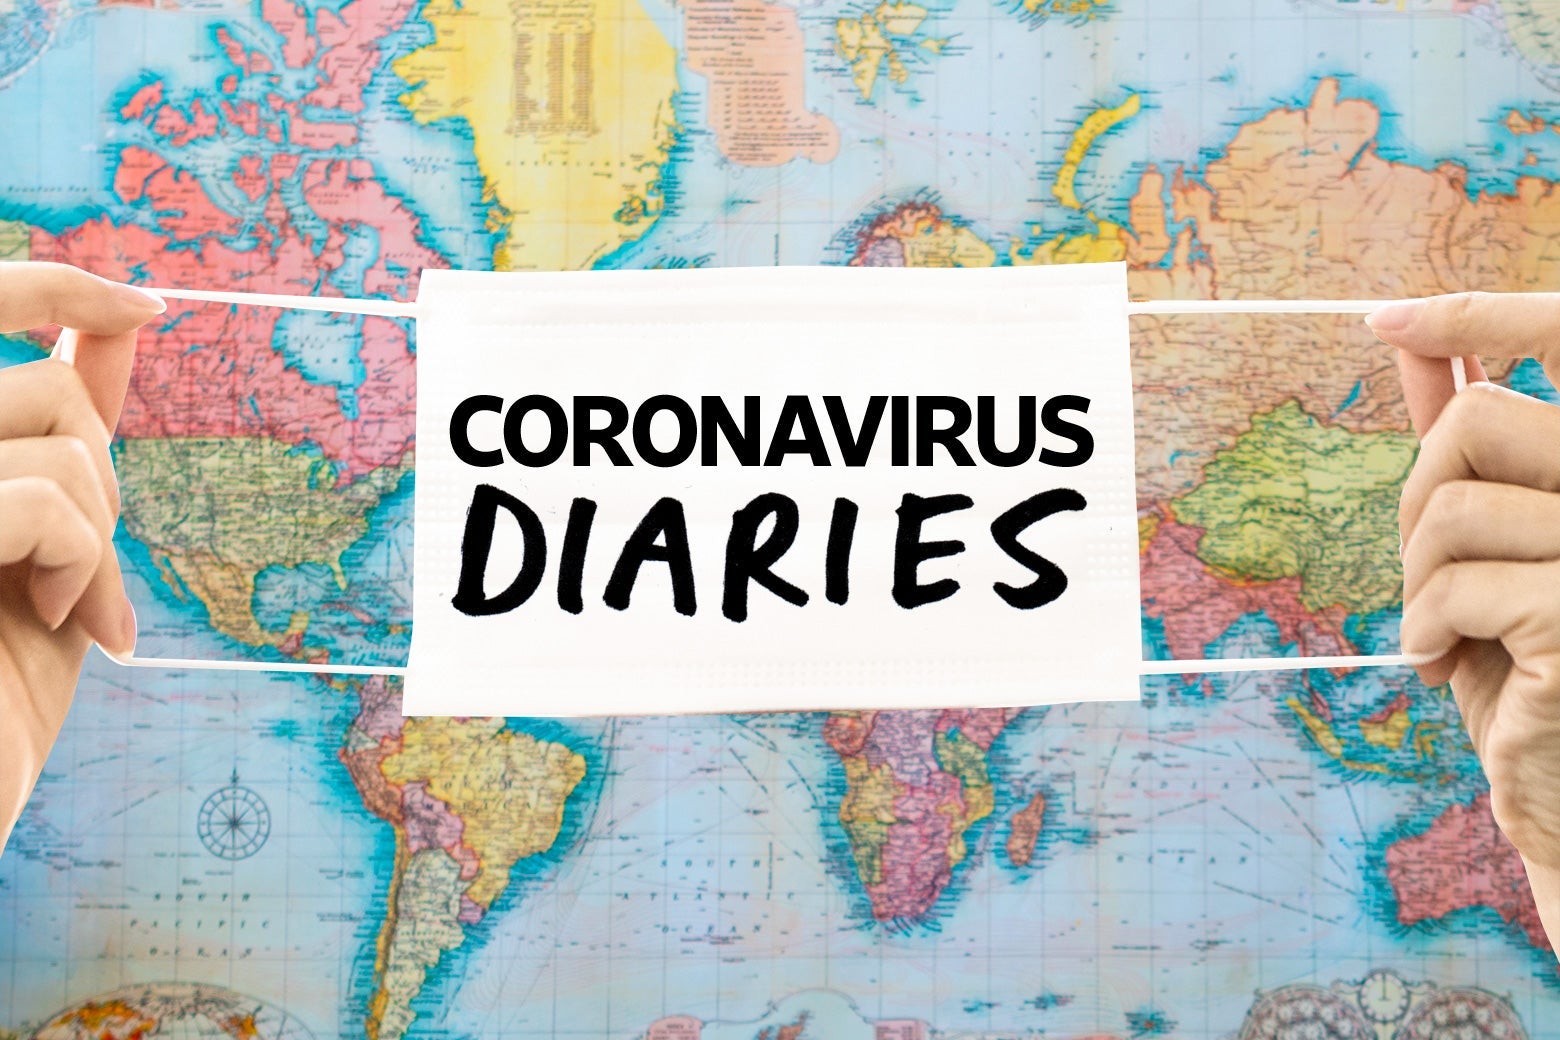 Two hands holding up a mask that says "Coronavirus Diaries" over a world map